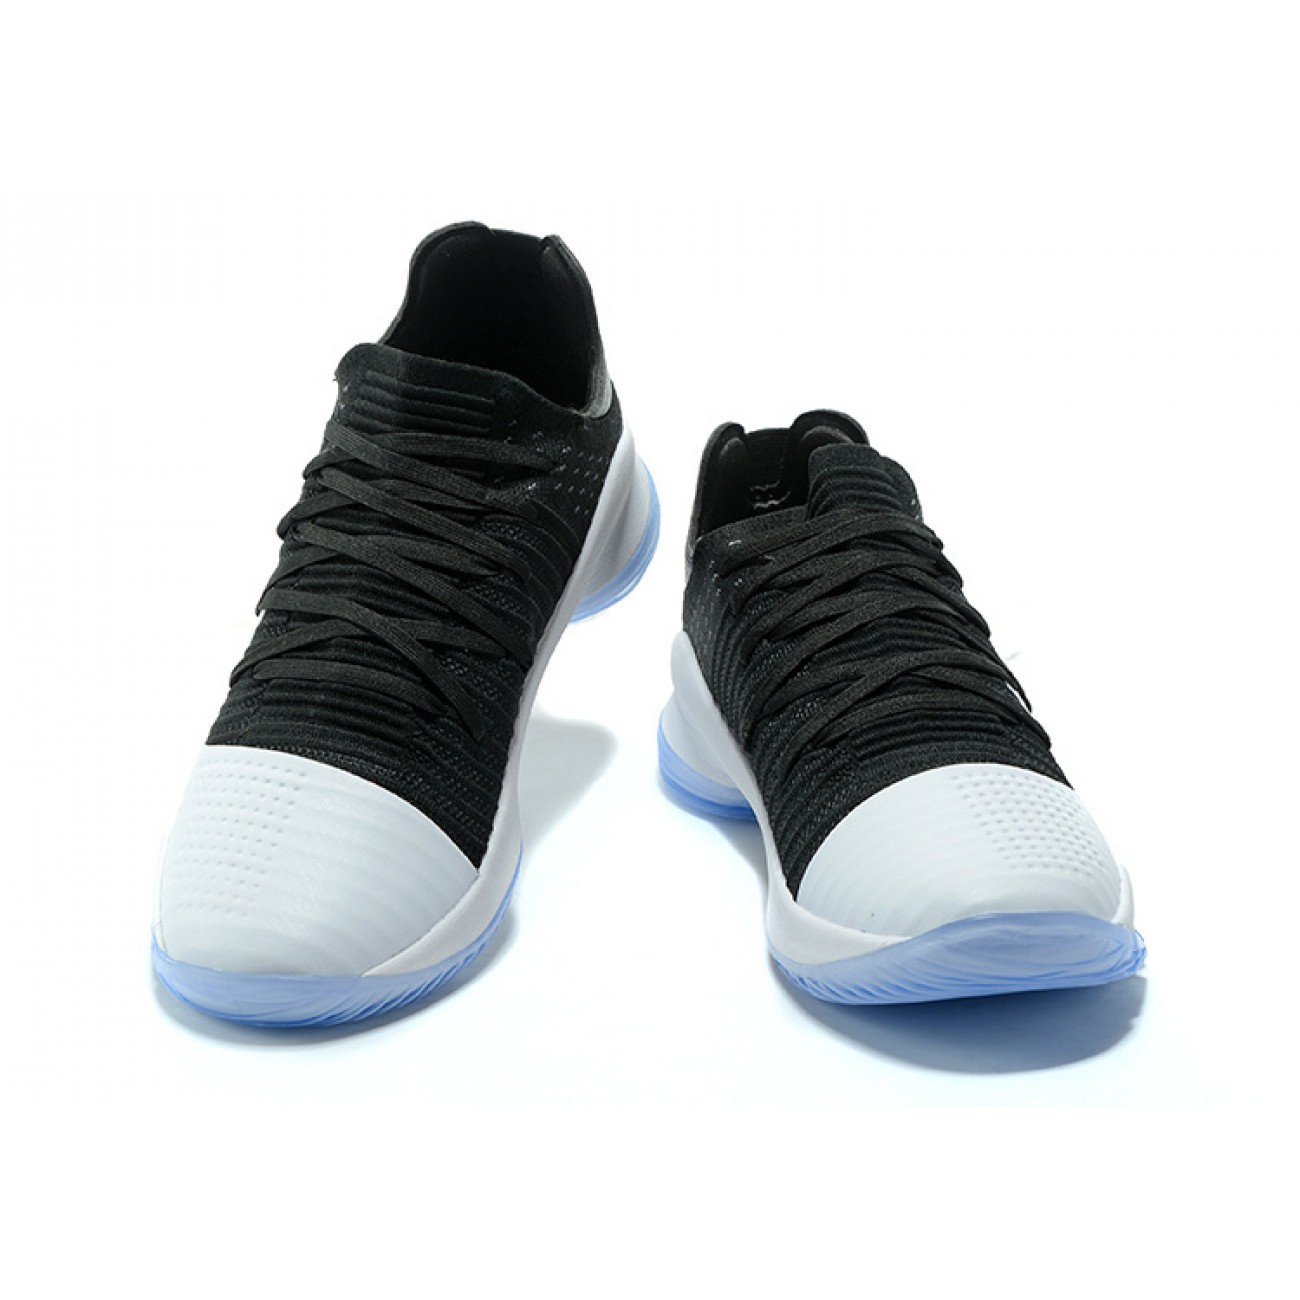 Under Armour UA Curry 4 WMN Low White/Black